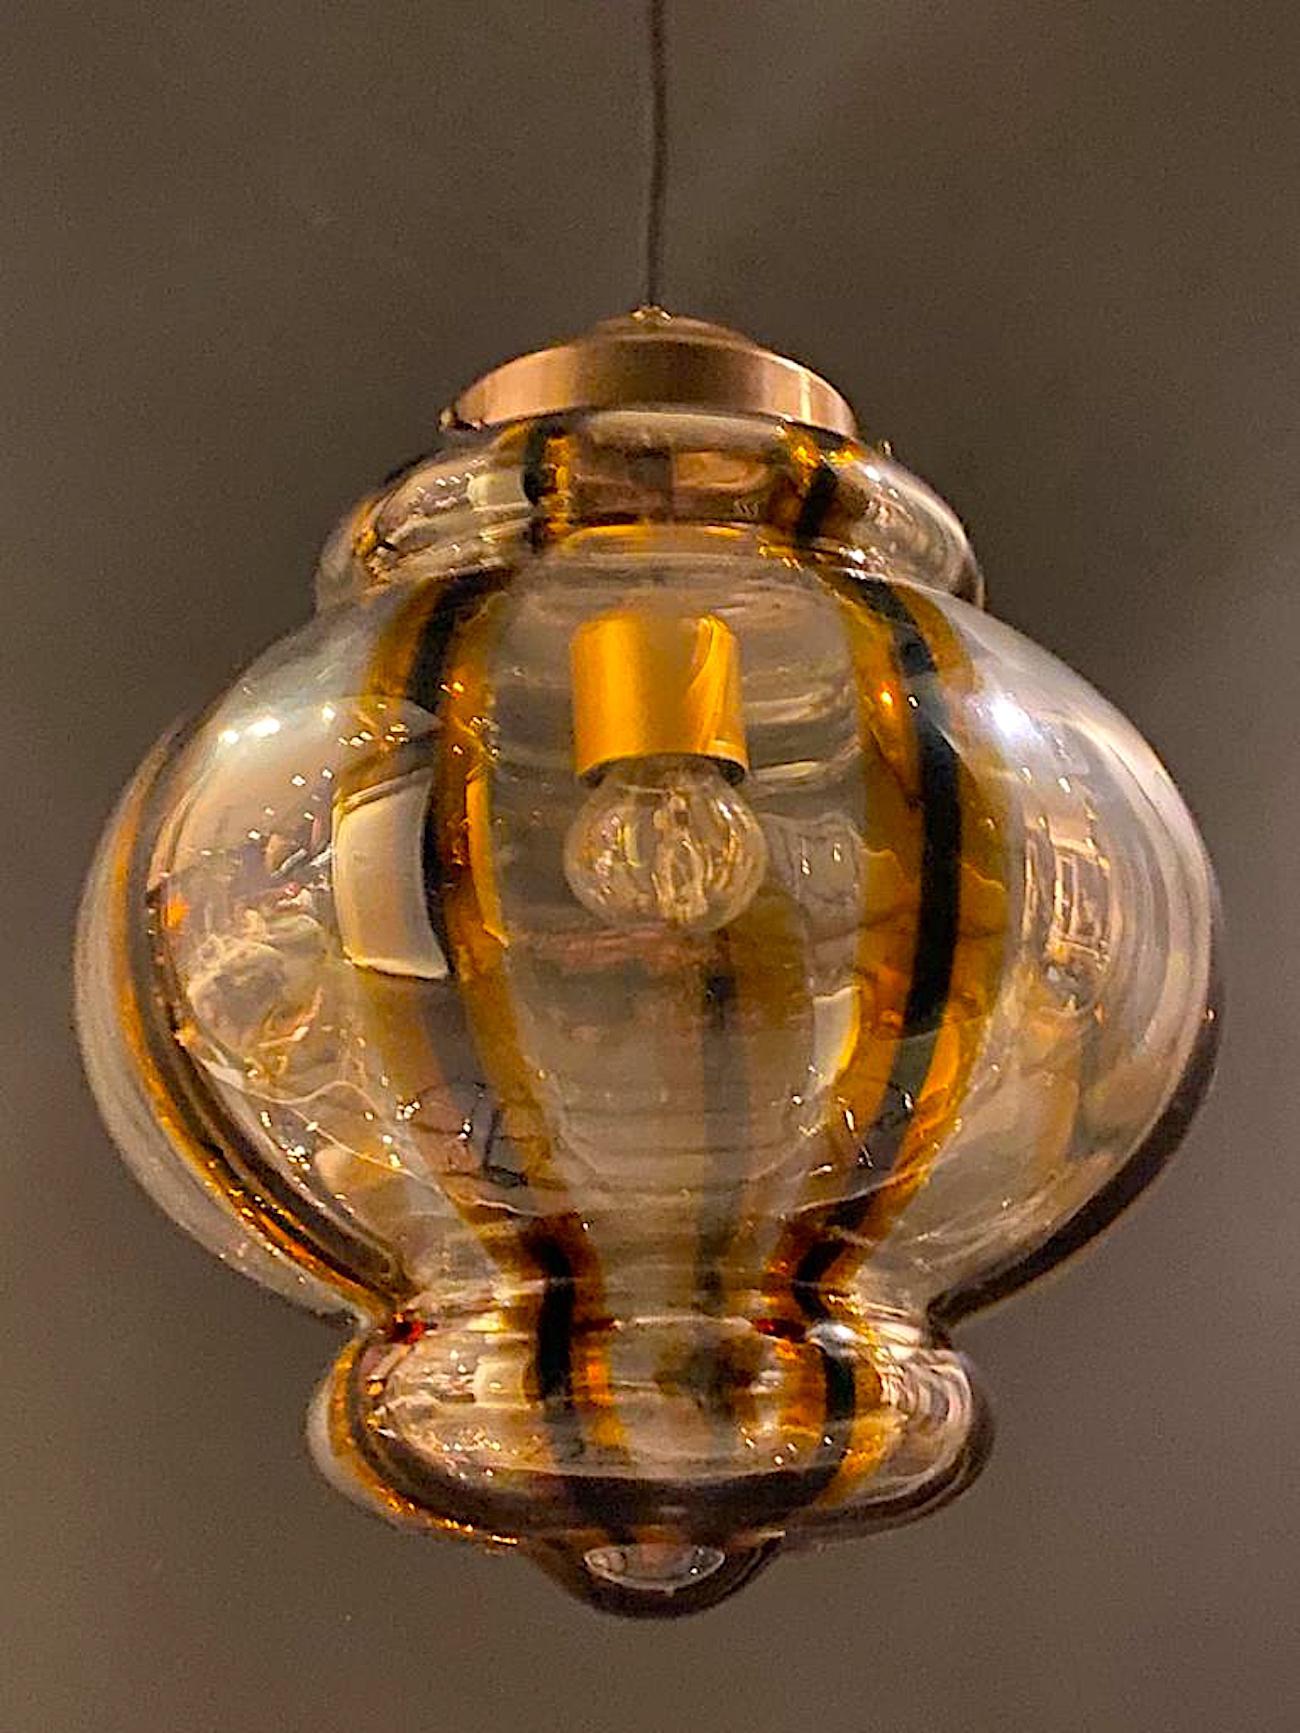 A beautiful hand blow glass pendant light from Murano Italy circa 1970. The shade is blown in clear glass with eight vertical stripes of dark green / black sandwiched between stripes of honey color gold. The shade cap and ceiling canopy are antique